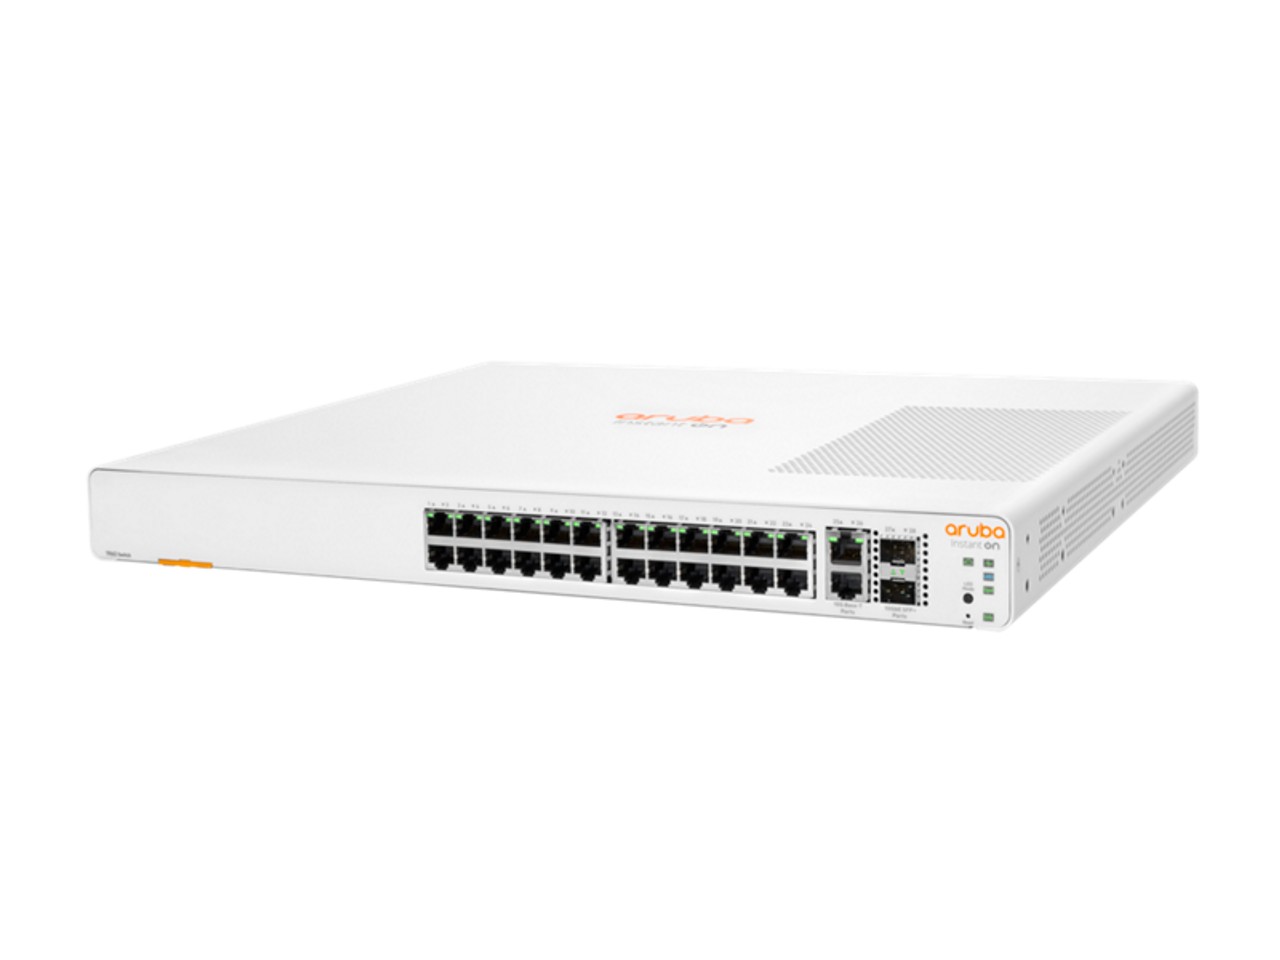 Aruba Instant On 1960 24-Port Gigabit Stackable Layer 2+ Smart Managed Switch With 2x10G & 2x10G SFP+